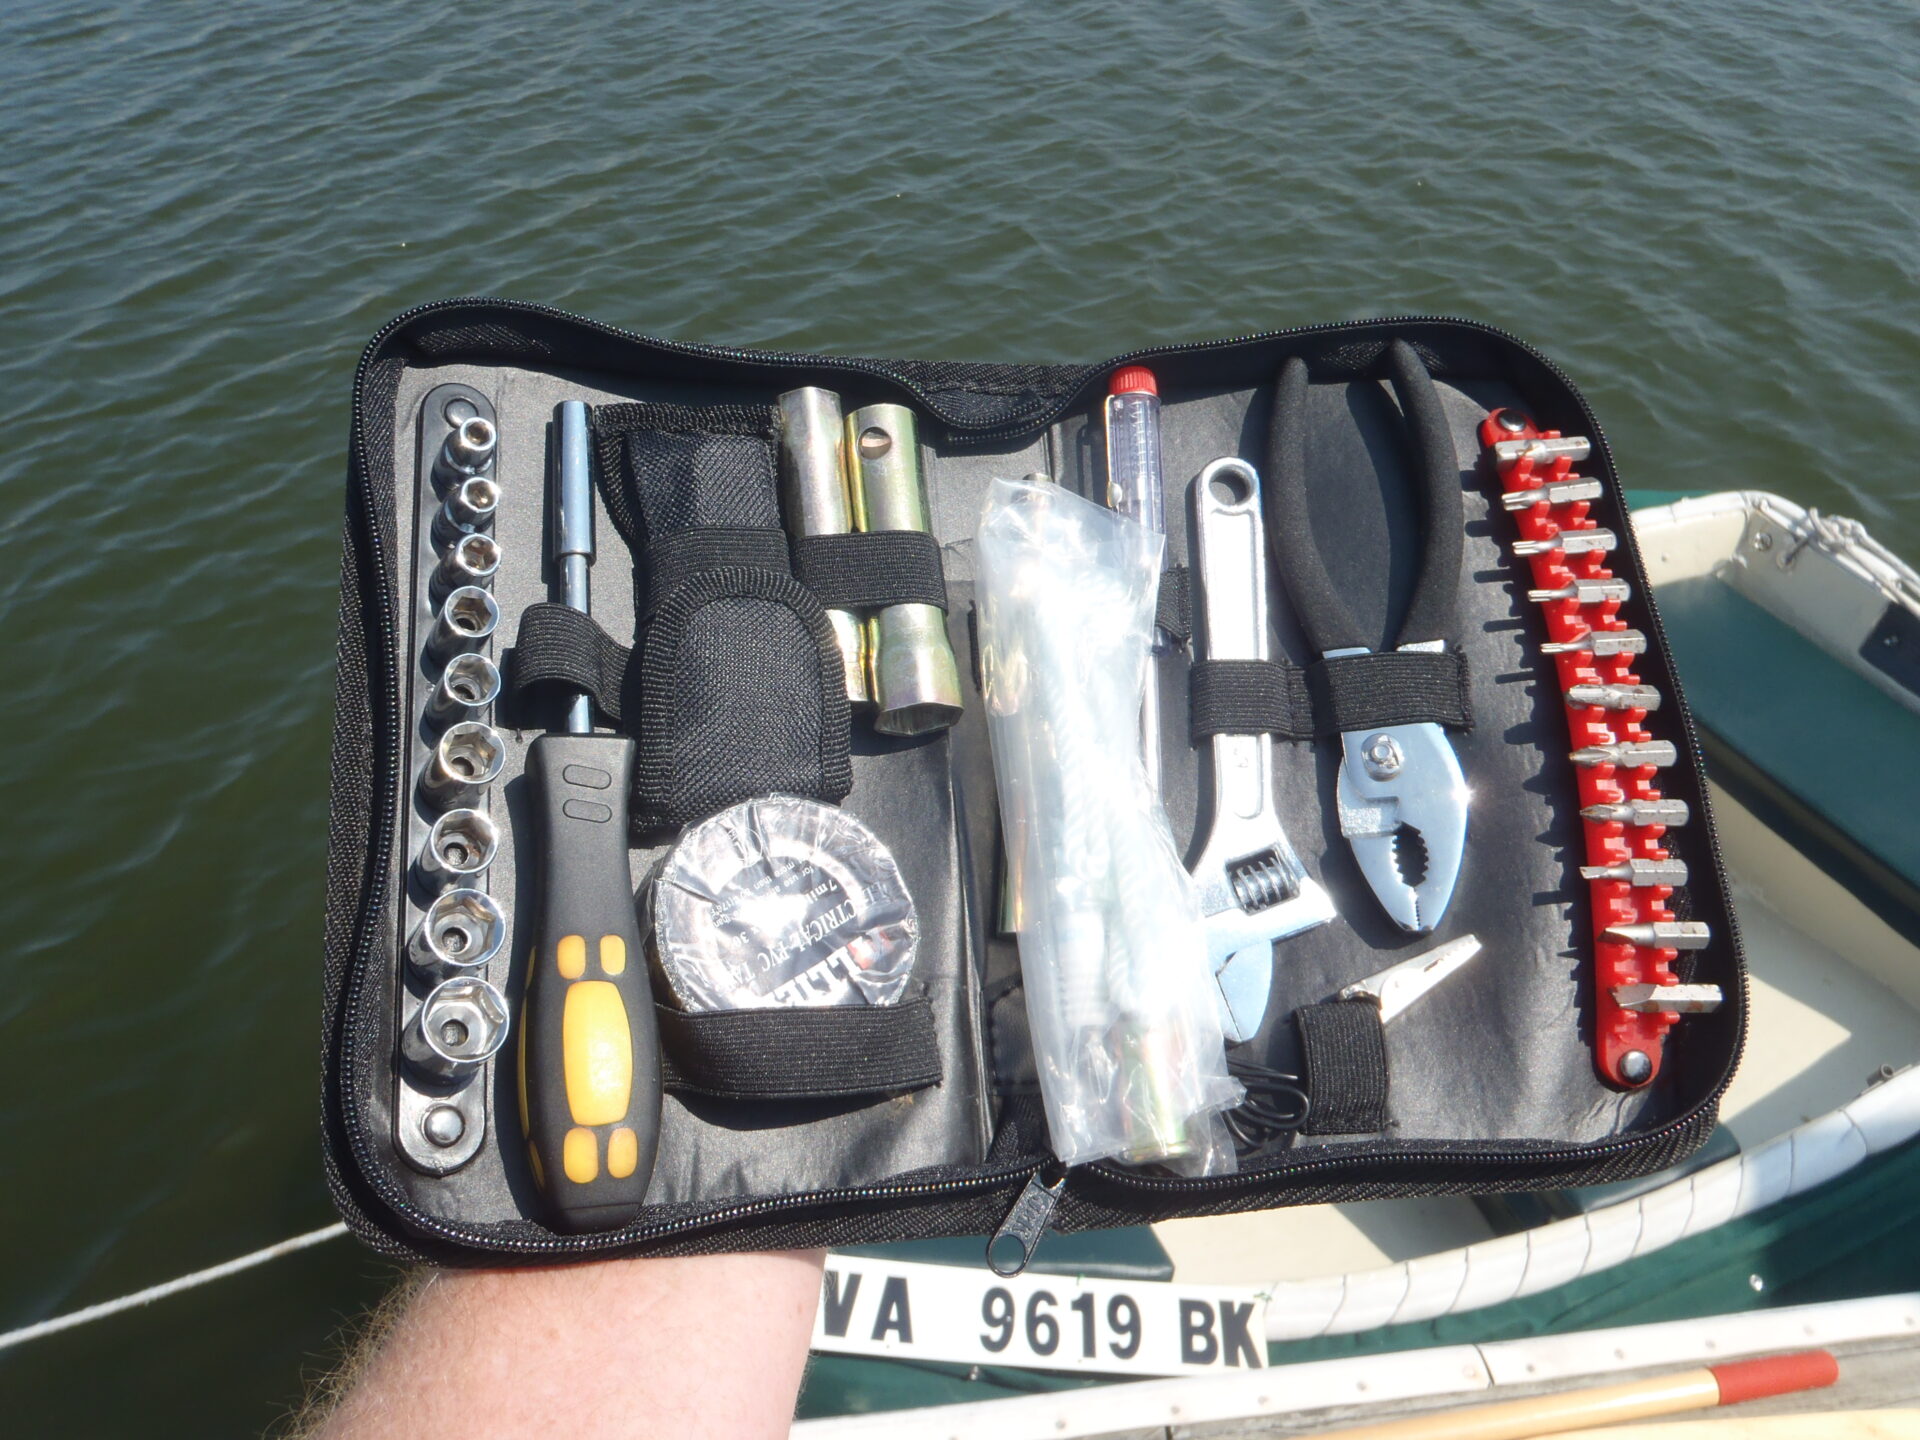 It’s worth it to carry an outboard toolkit in your dinghy.